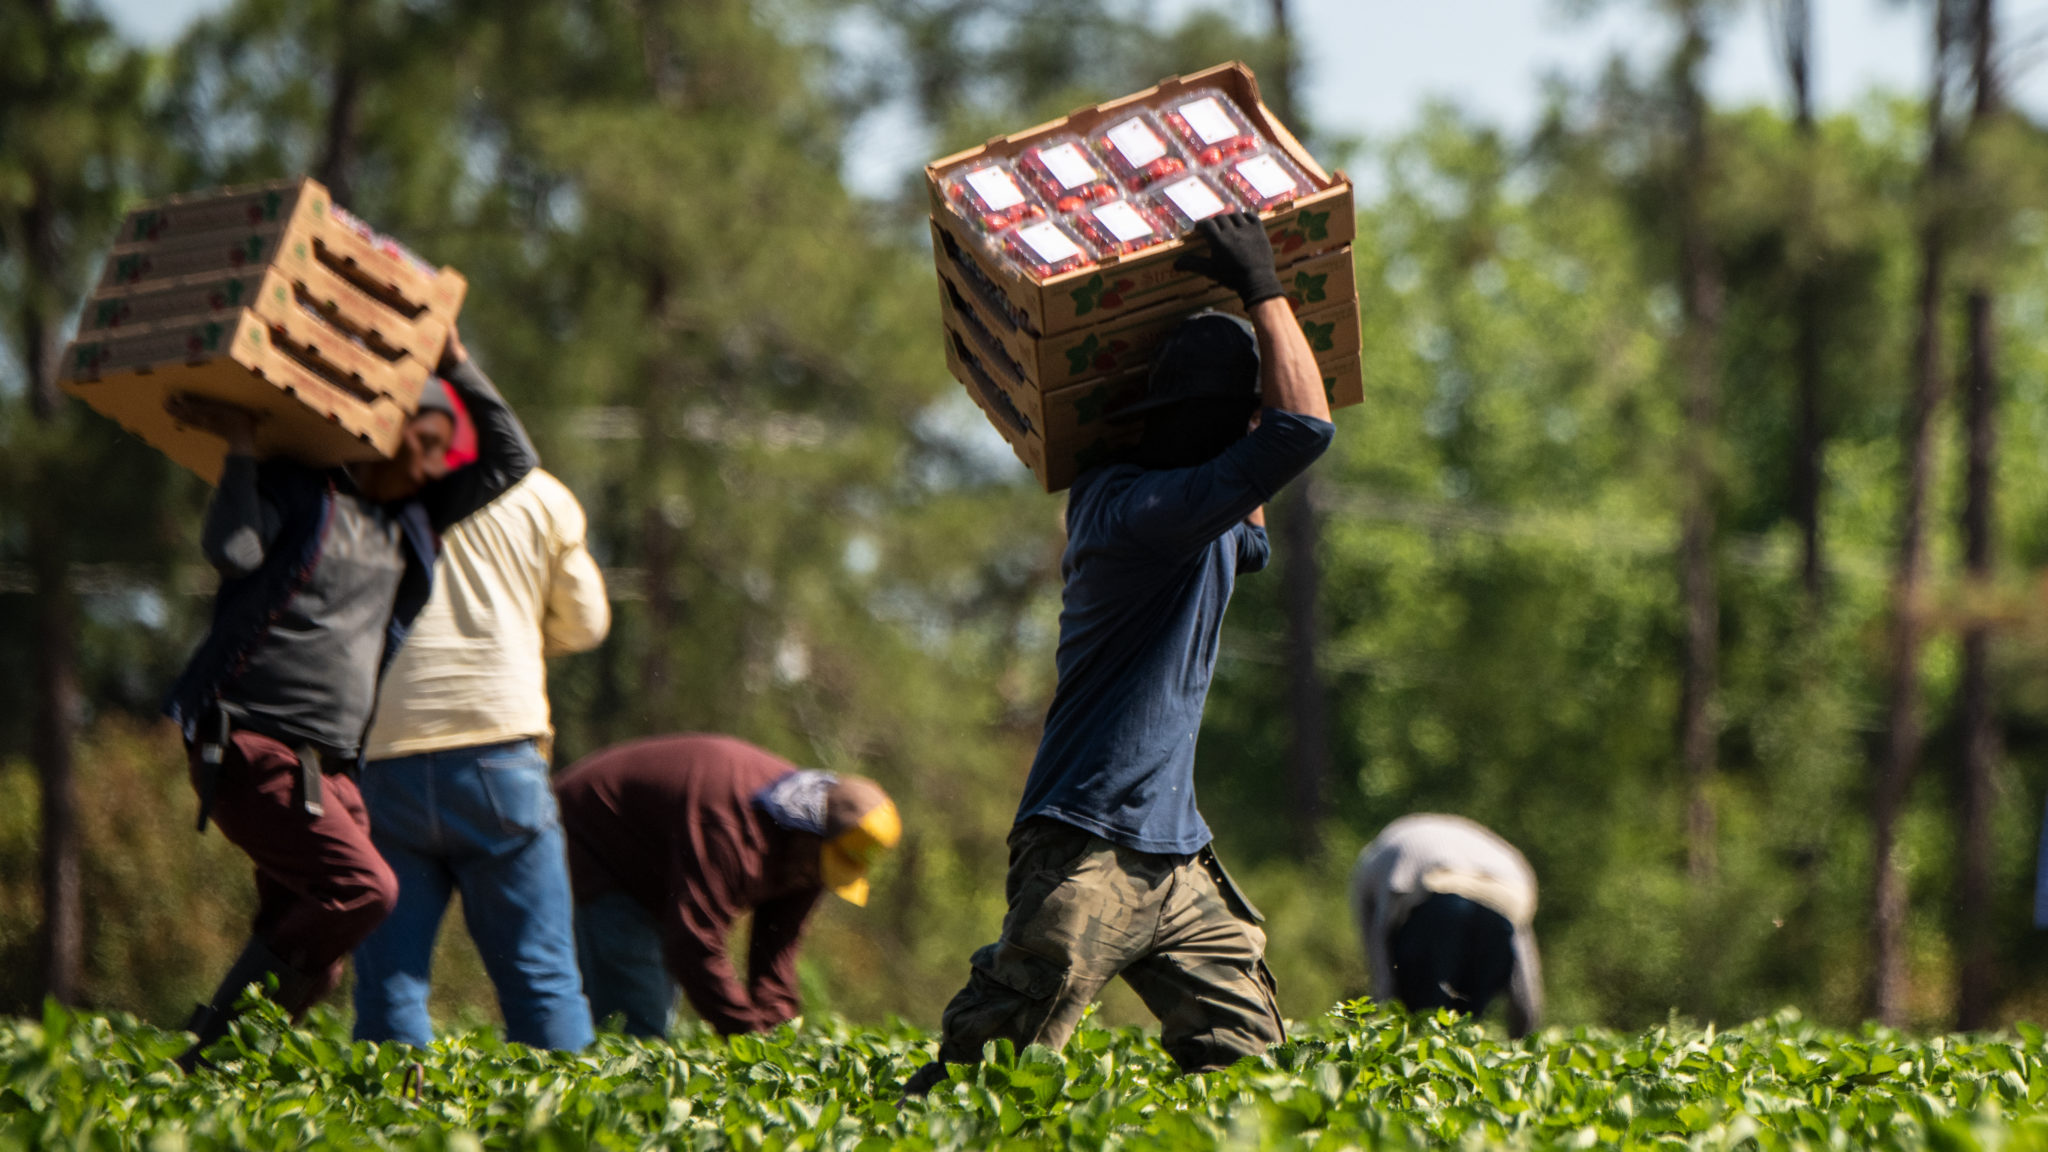 Farm workers harvesting crops and hauling boxes of produce